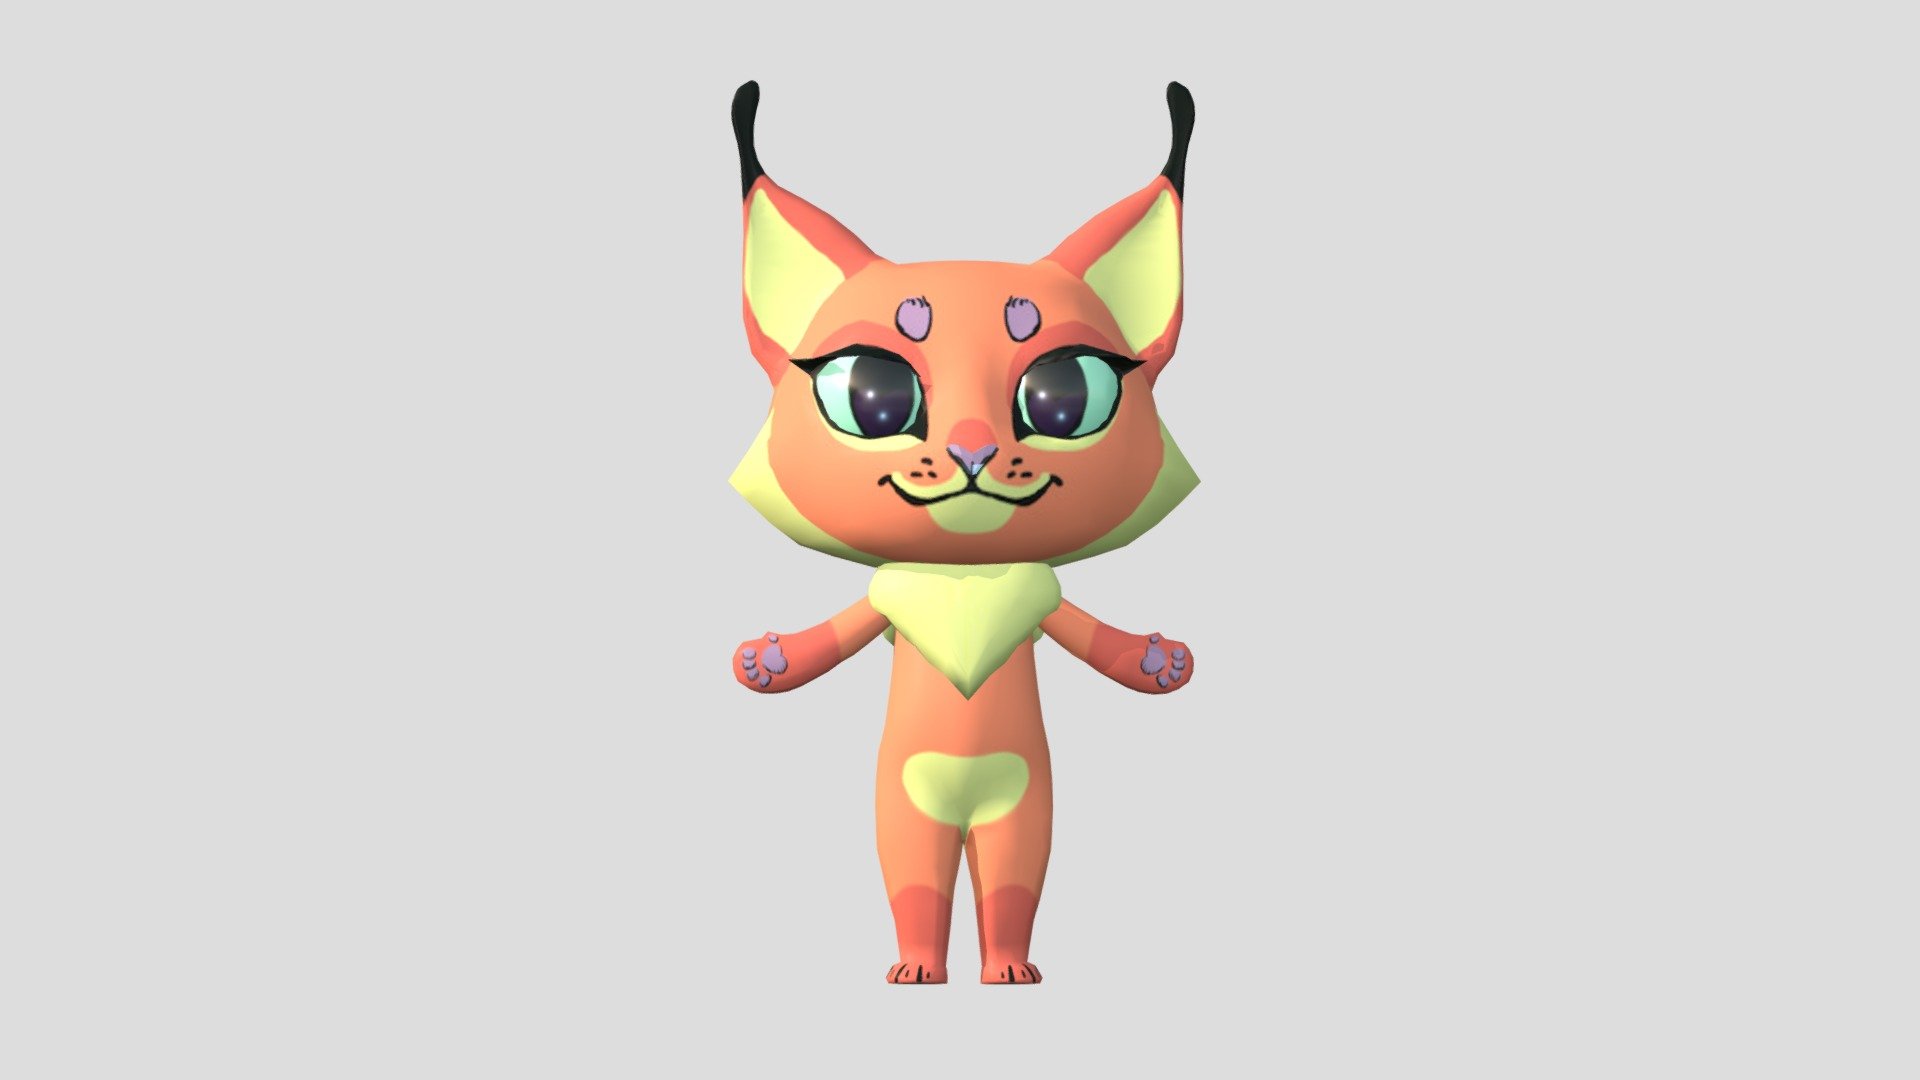 my first character made in blender, please download if you need! - cartoon lynx - Download Free 3D model by rastamankus 3d model